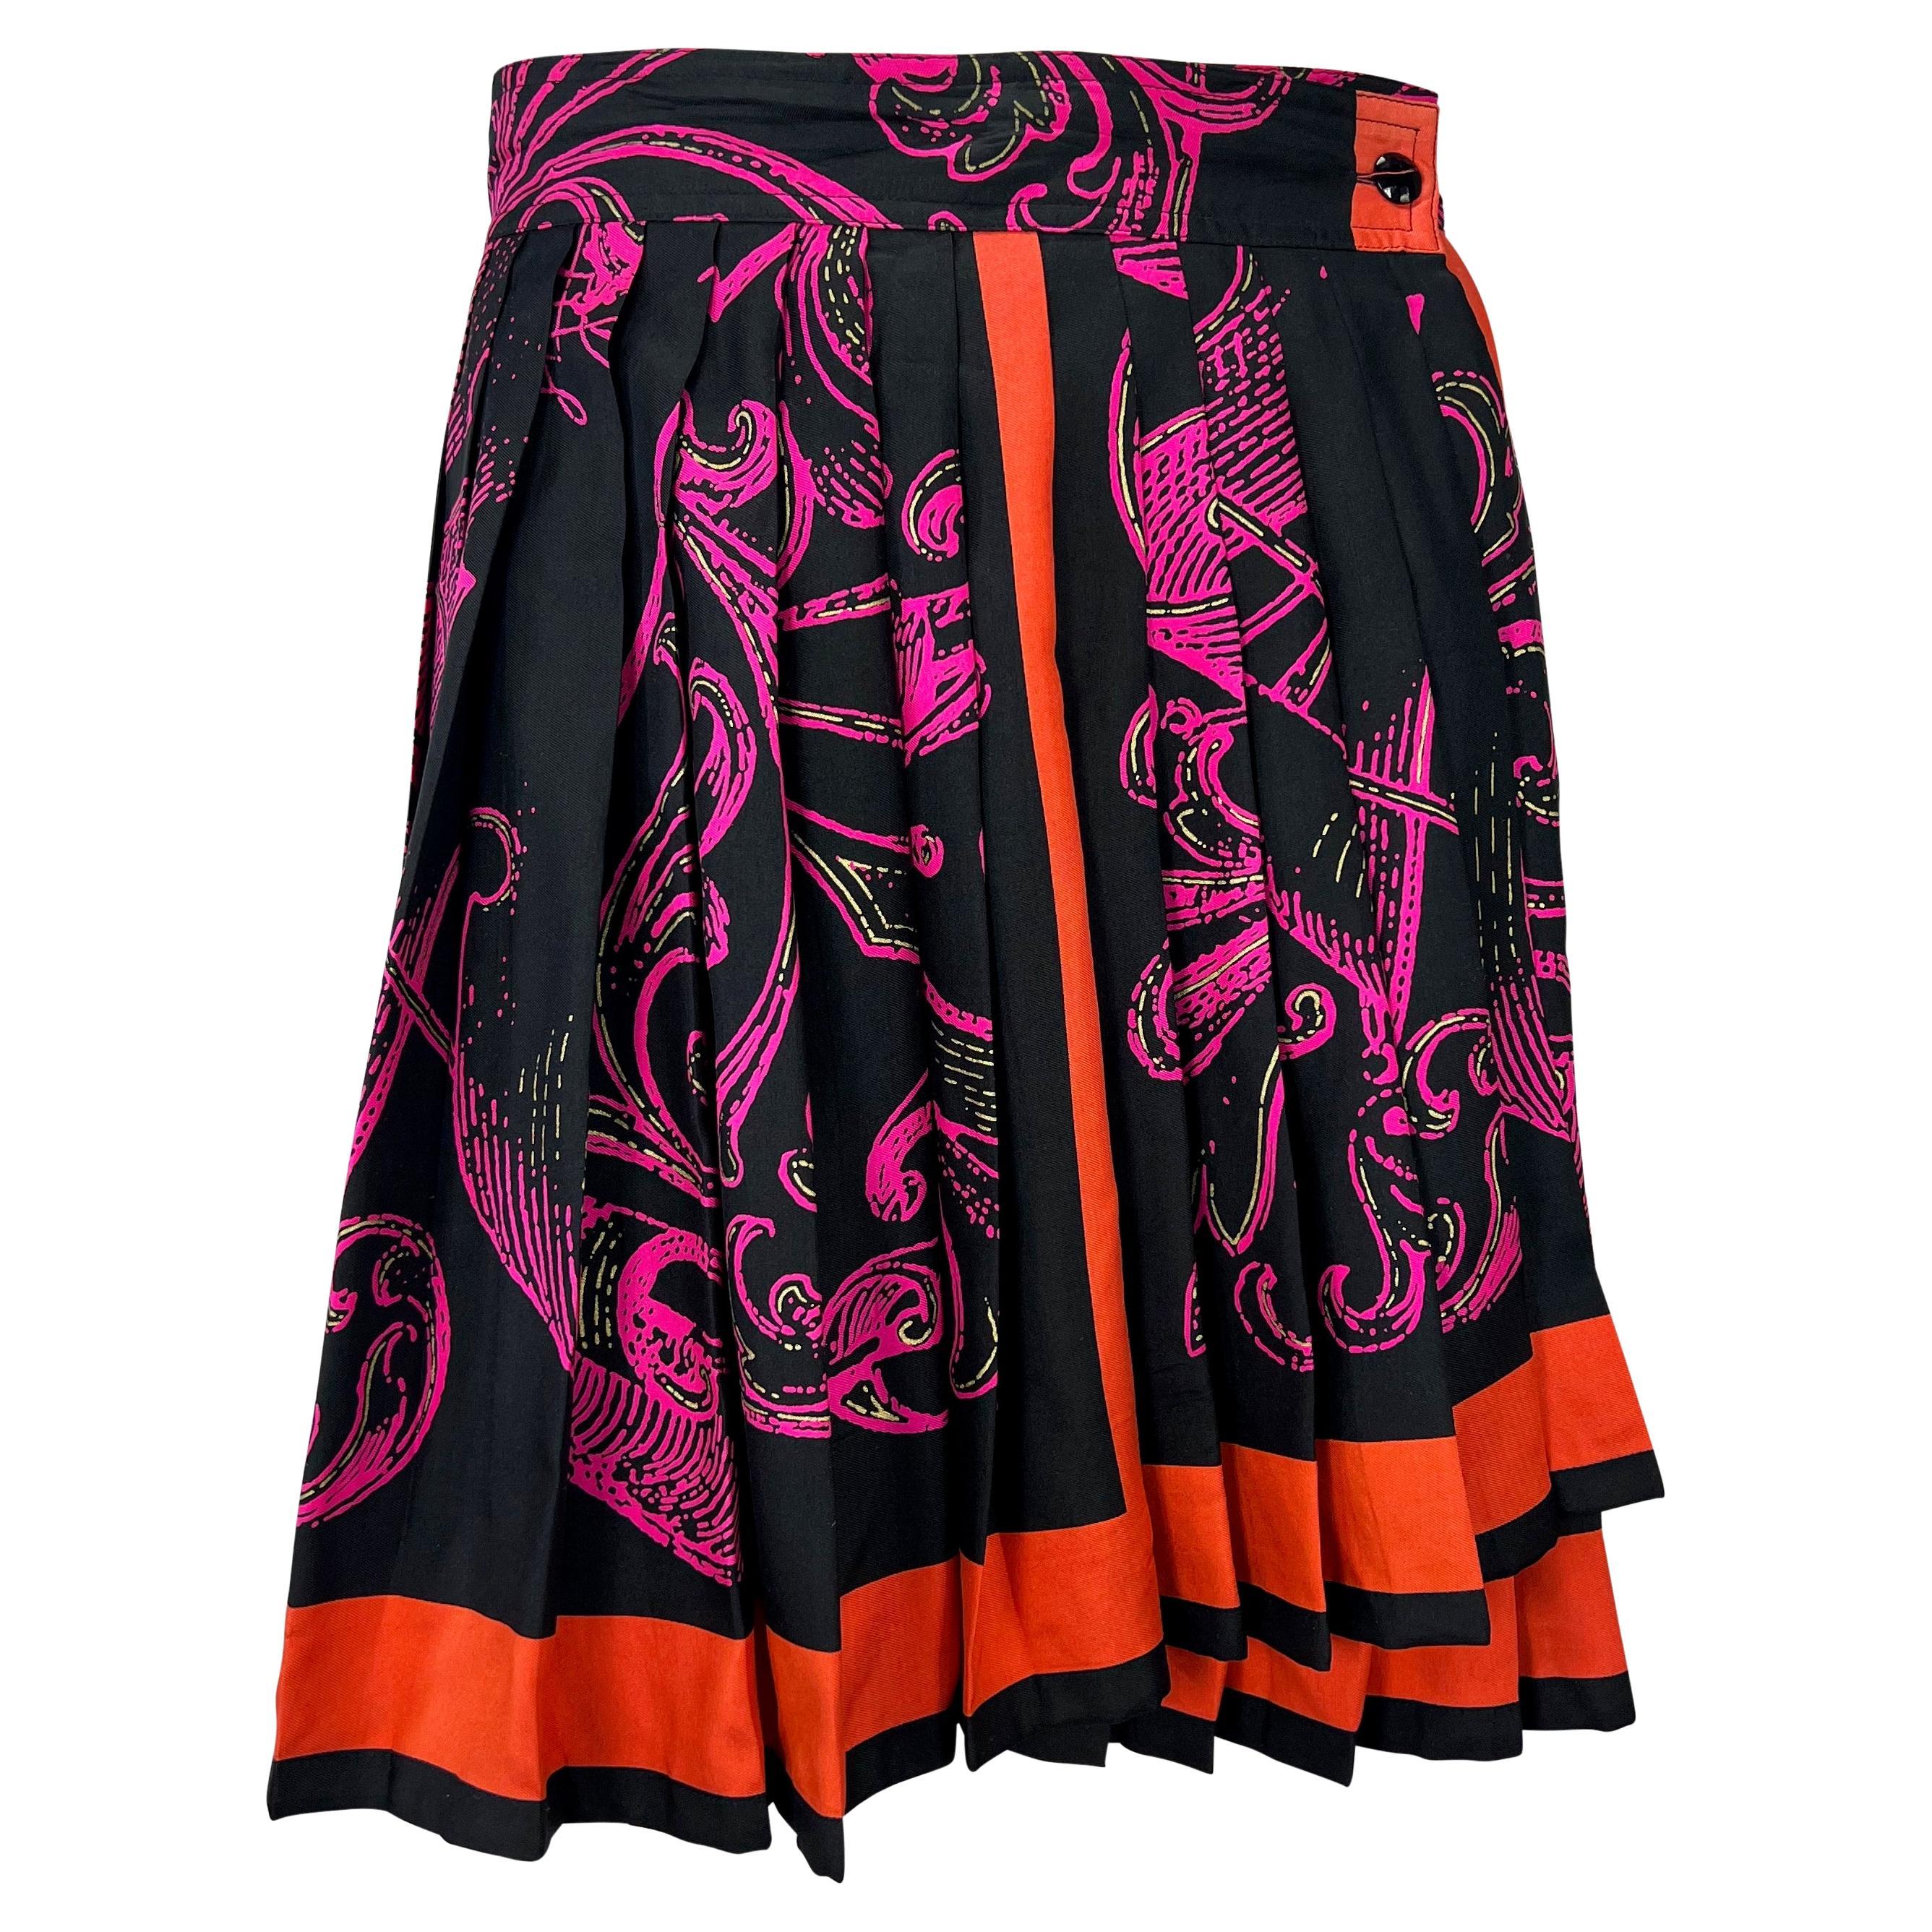 Presenting a bold pink and black baroque print wrap skirt with orange trim designed by Gianni Versace in the early 1990s. The accordion pleating and wrap construction give this light skirt bounce with every step. Check out our storefront for more